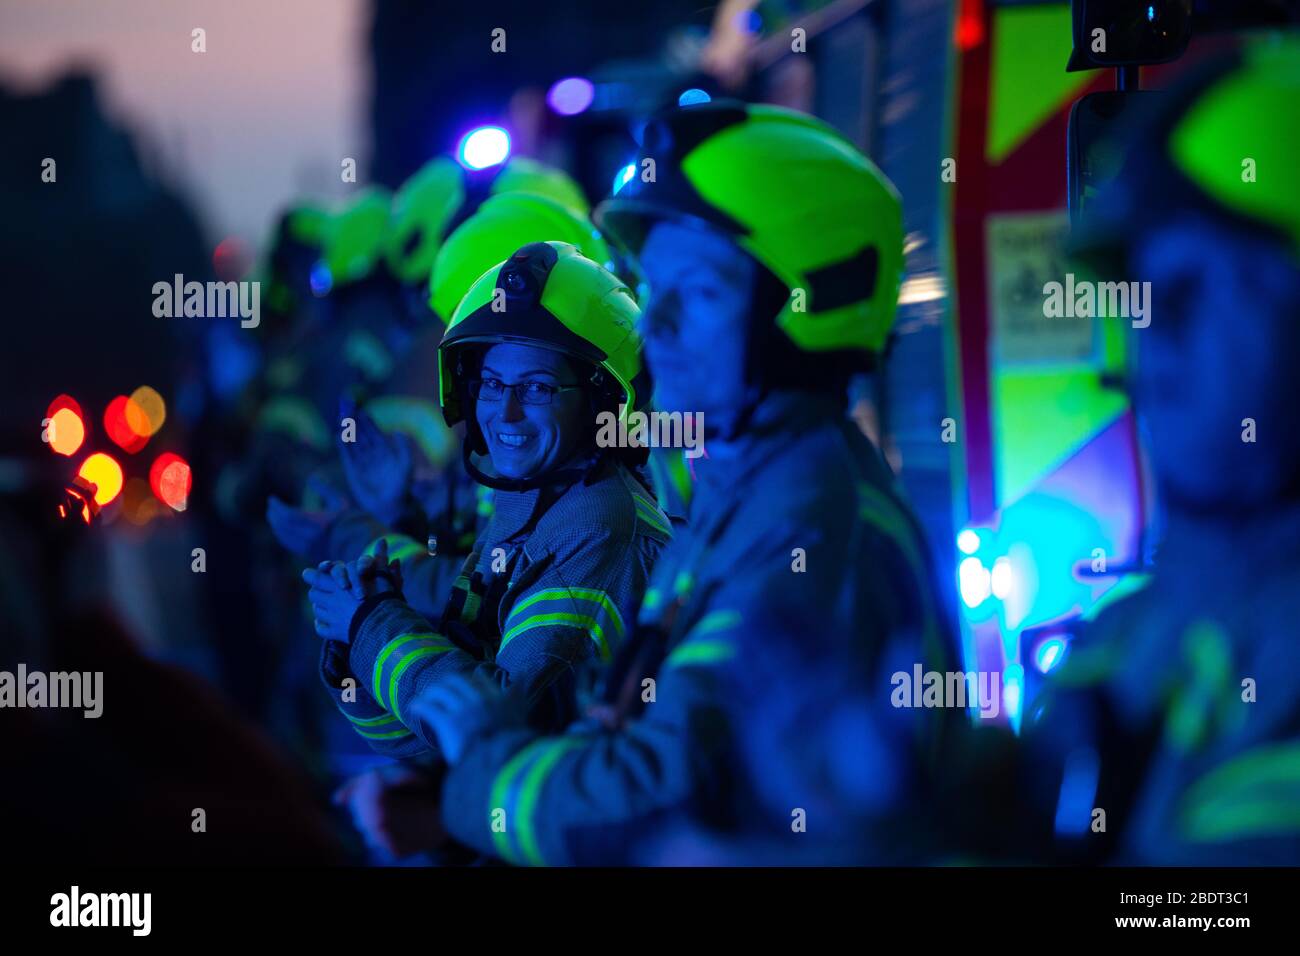 London, UK. 09th Apr, 2020. Emergency services take part in the Clap for Carers on Westminster Bridge in view of St Thomas' Hospital where the Prime Minister Boris Johnson is being treated for Covid 19. Credit: David Parry/Alamy Live News Stock Photo